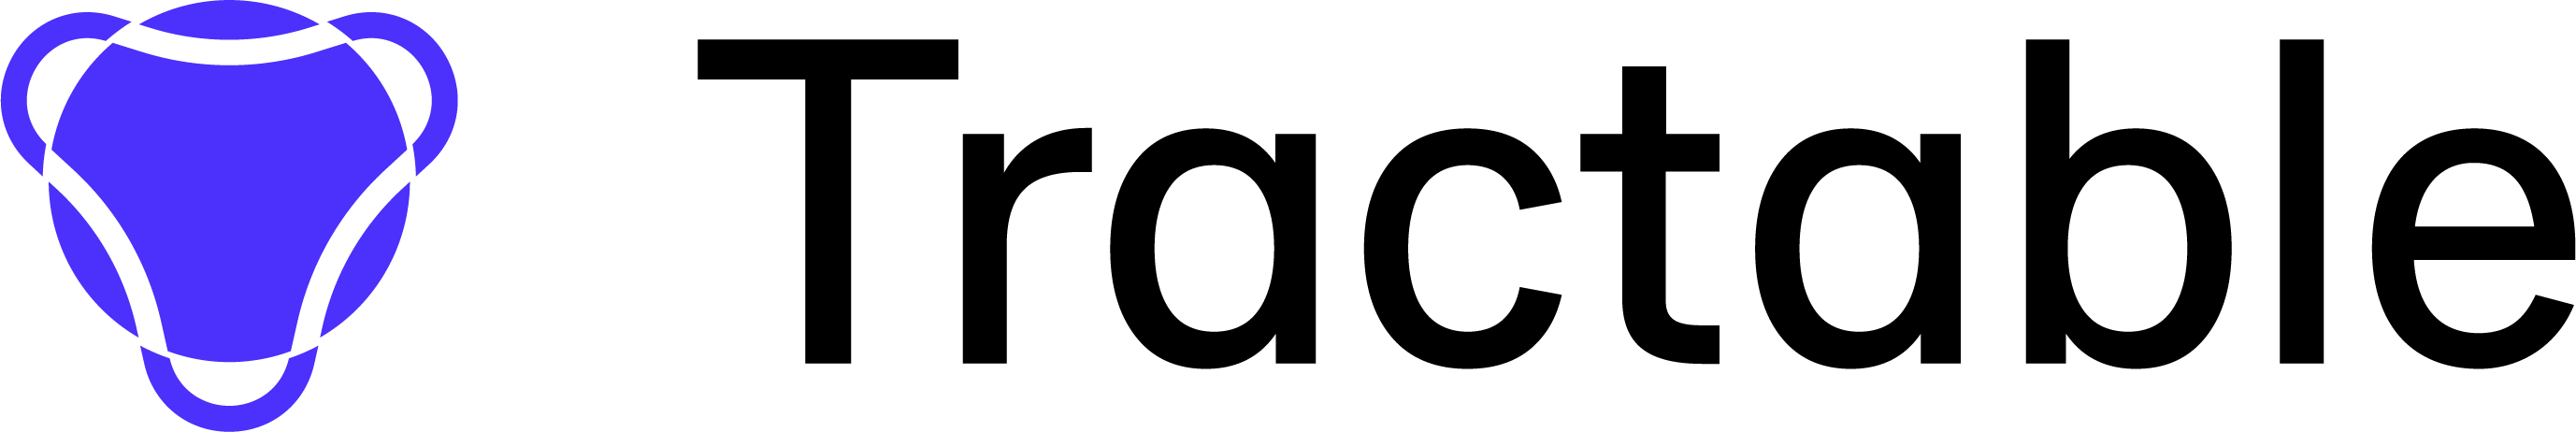 Tractable new logo